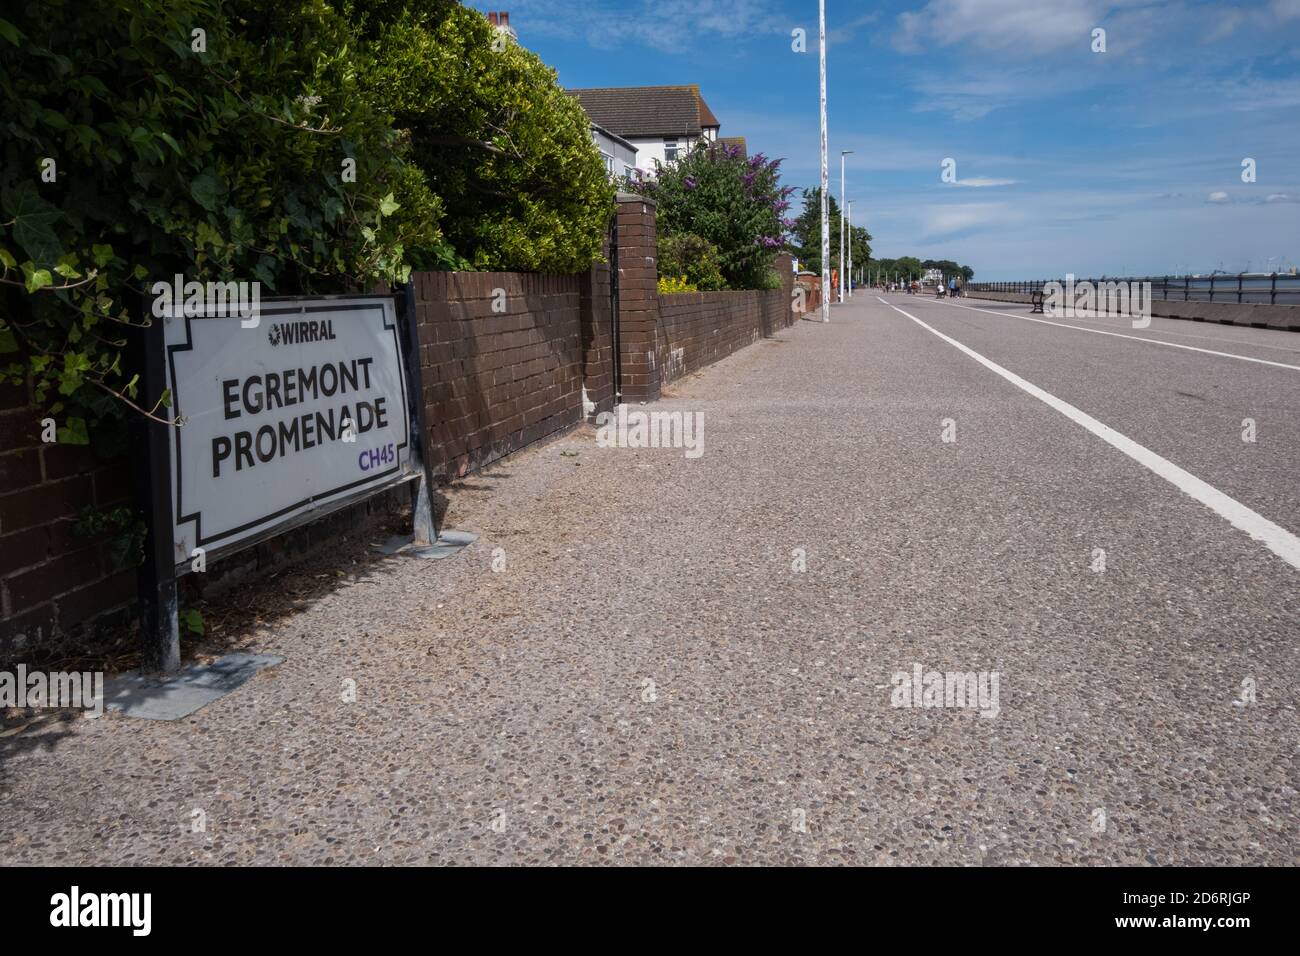 Egremont promenade Wallasey in Wirral July 2020 Stock Photo